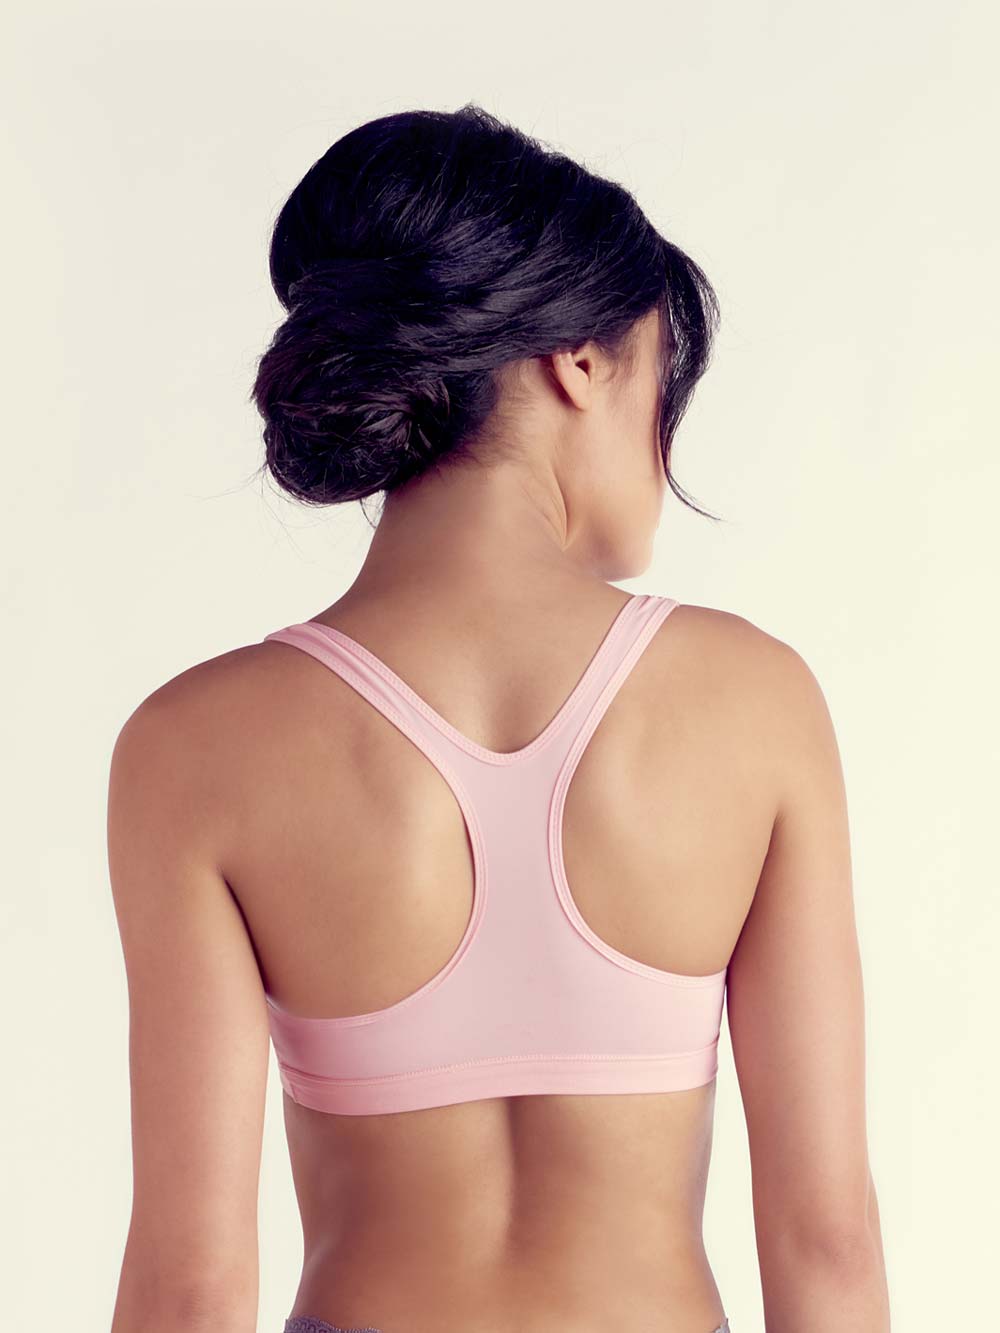 Busty Petites: The Best Fitting And Supportive Sports Bras - Beth